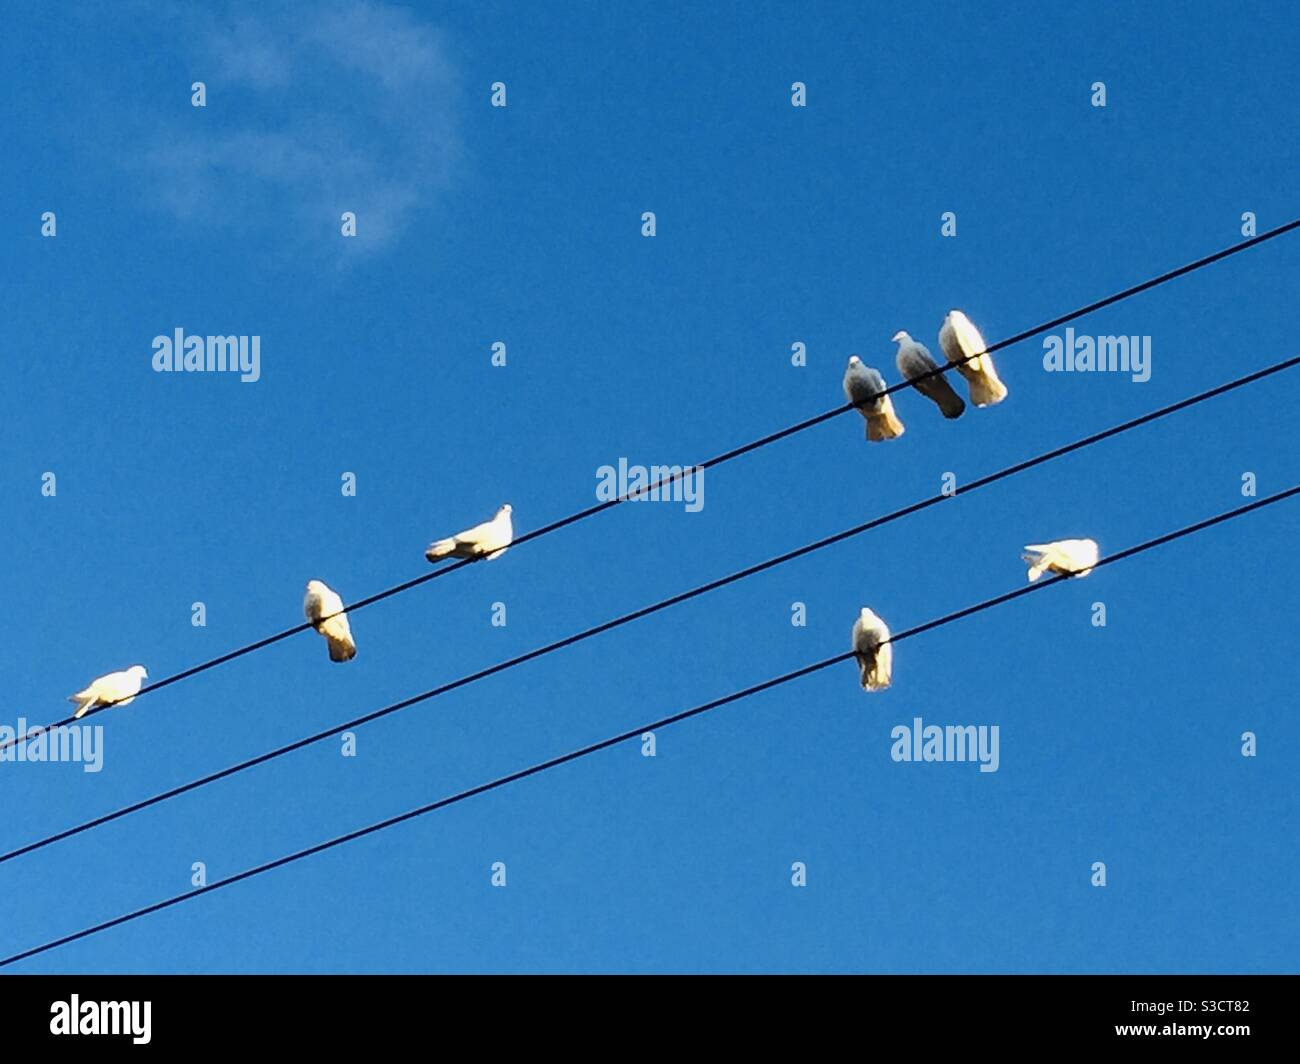 Birds on a wire. White doves on overhead cables Stock Photo